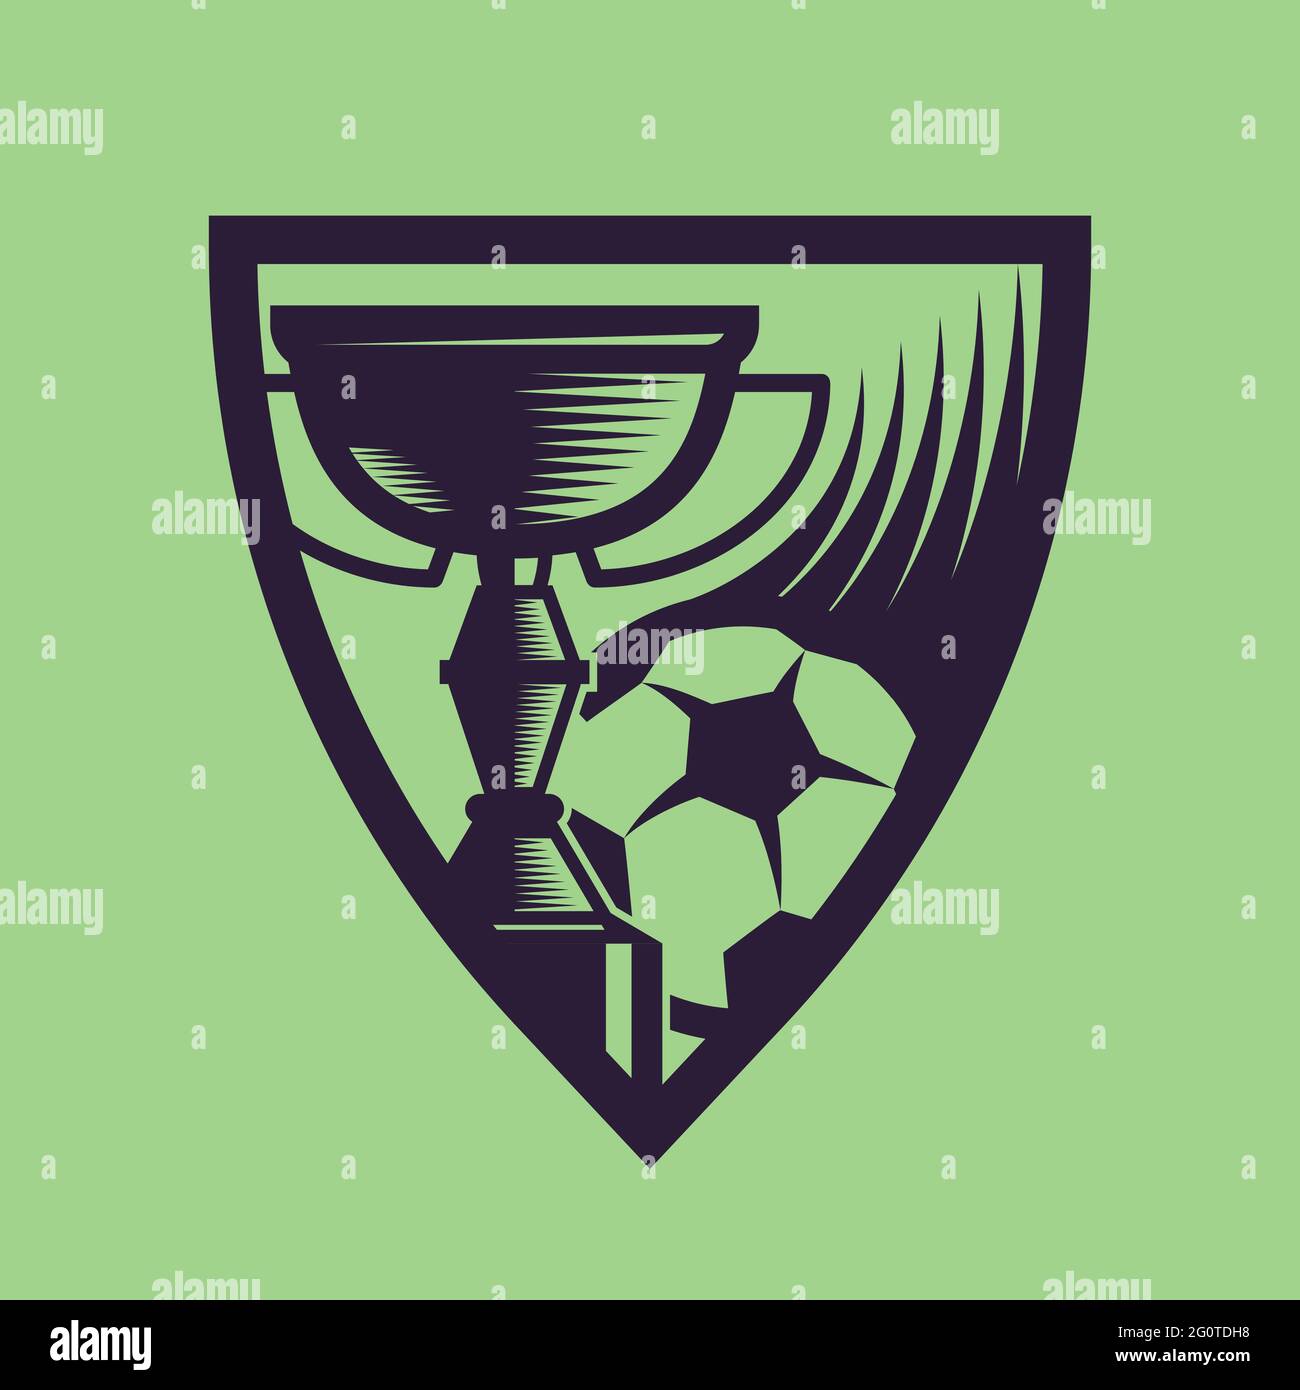 Sports cup with ball. Concept art of football in monochrome style. Stock Vector